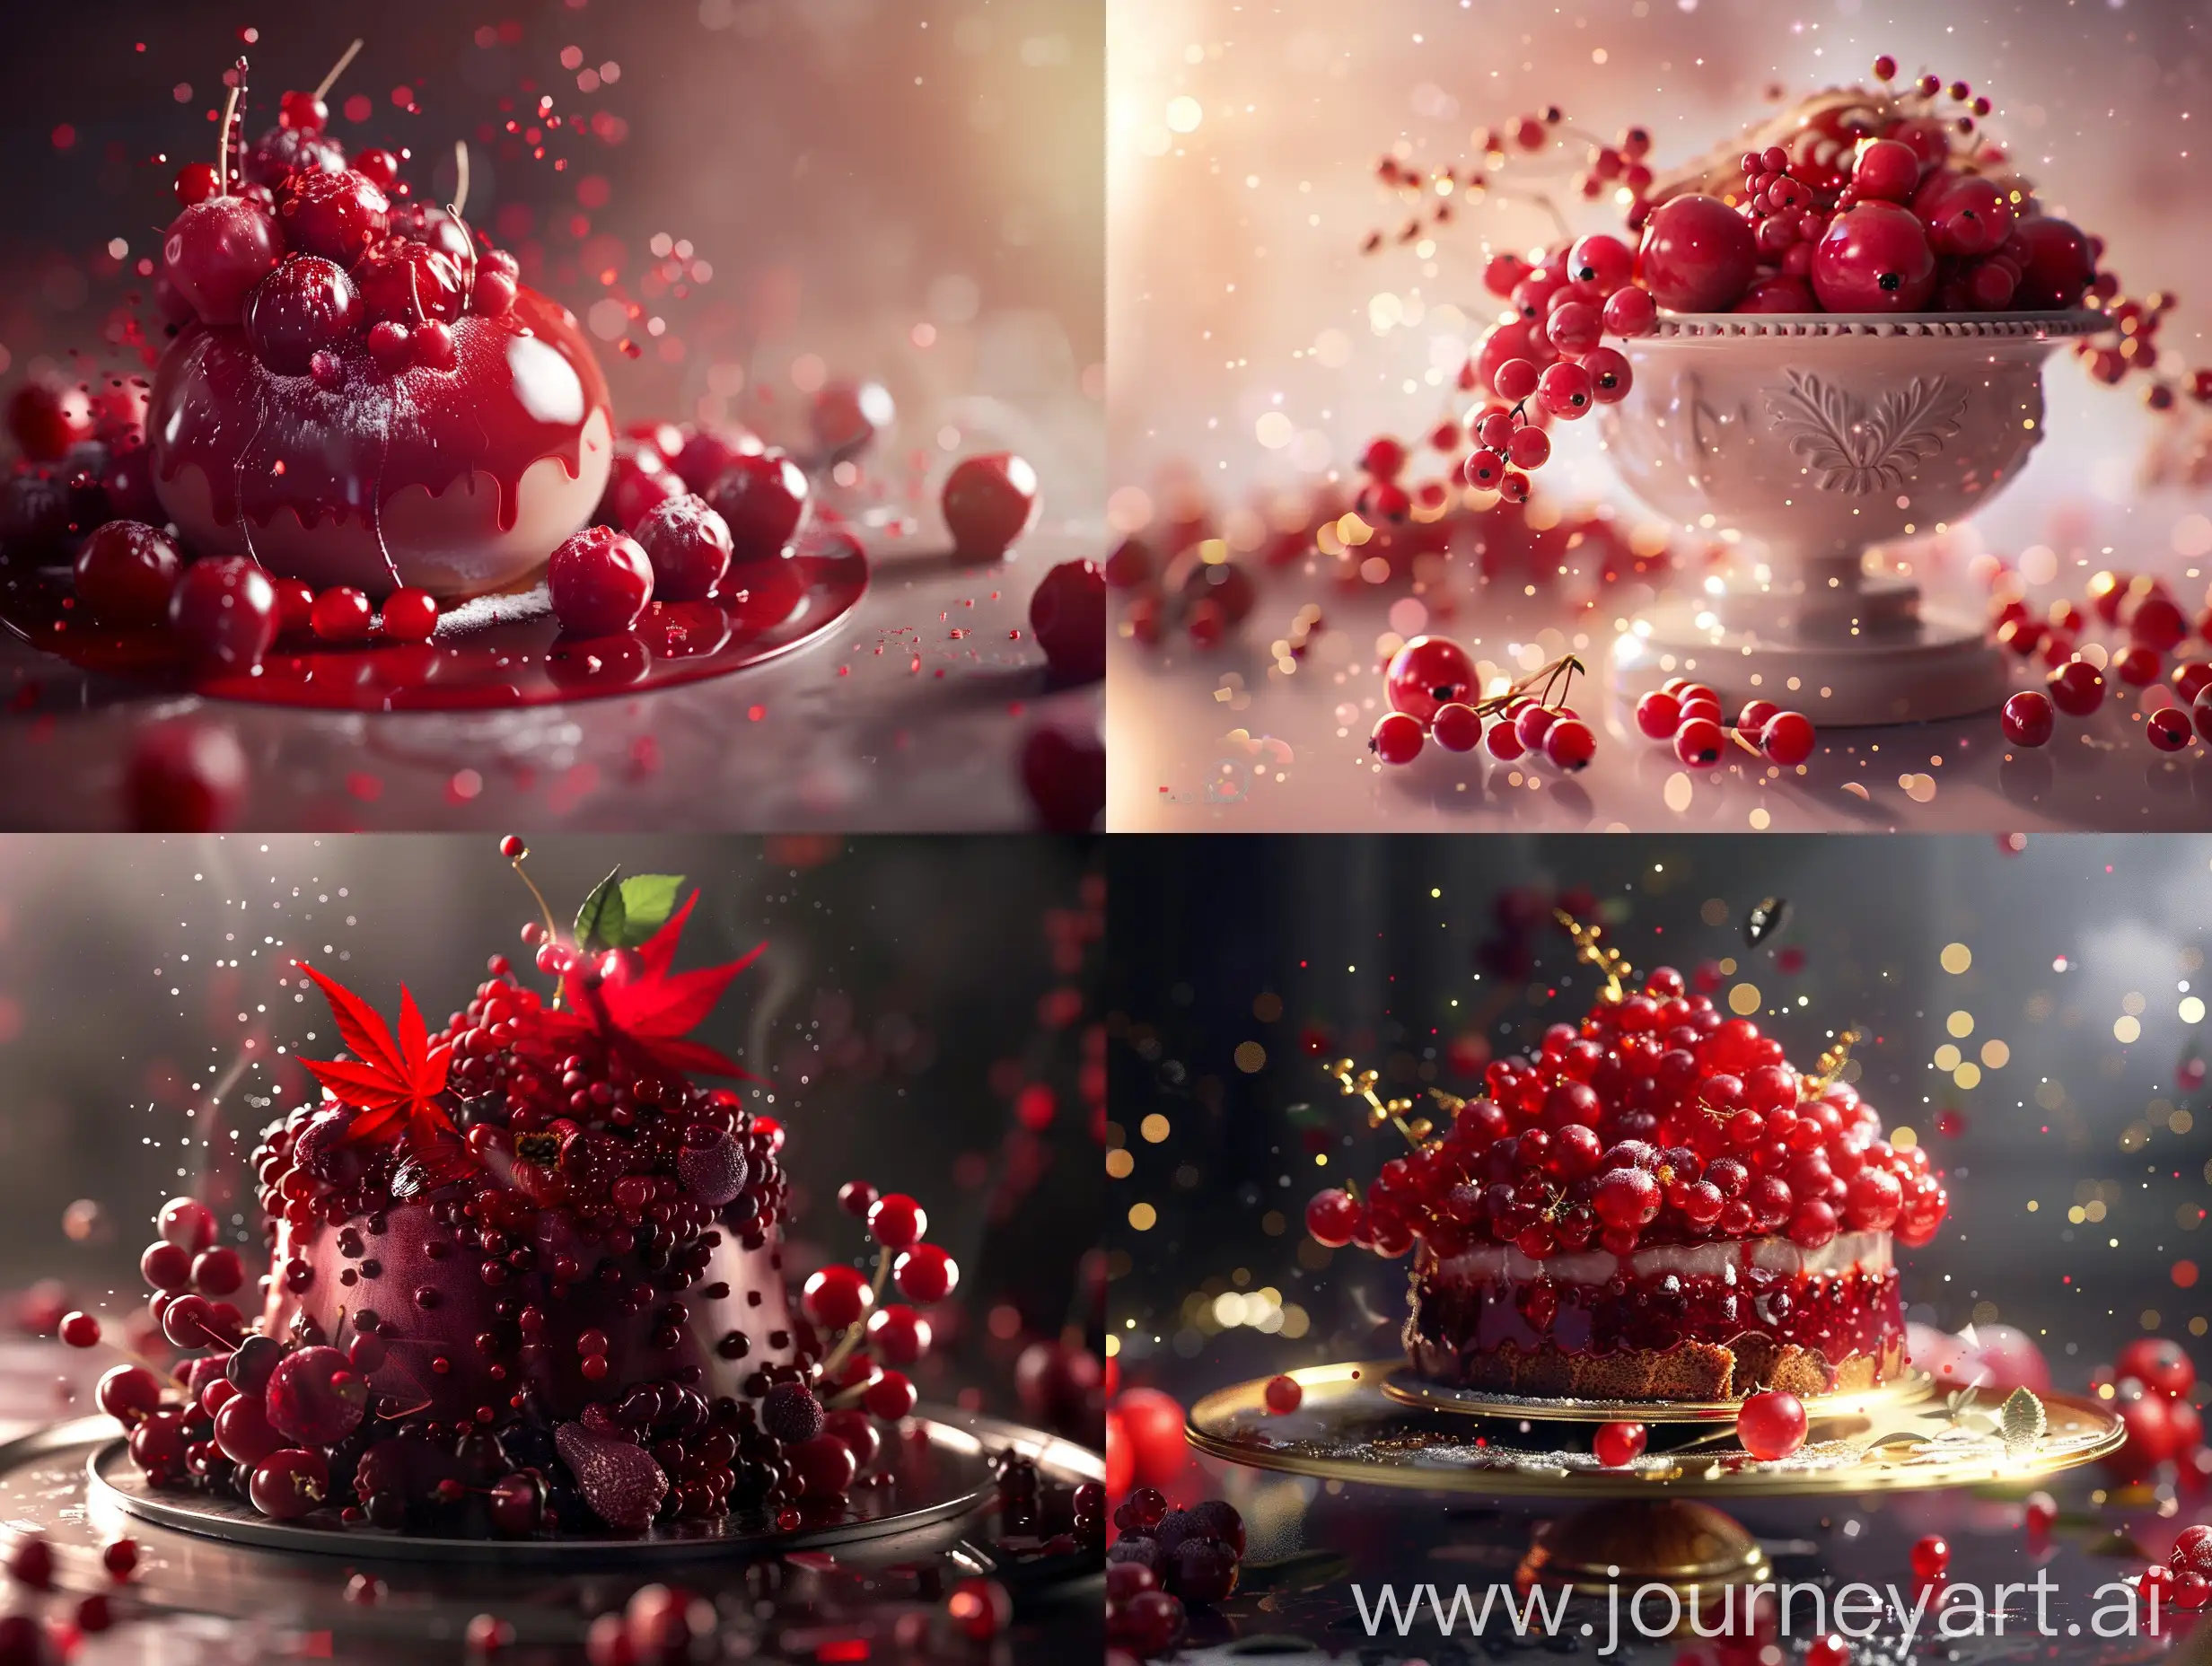 Bolo Decorado com frutas vermelhas , Cinematic, Photoshoot, Shot on 25mm lens, Depth of Field, Tilt Blur, Shutter Speed 1/1000, F/22, White Balance, 32k, Super-Resolution, Pro Photo RGB, Half rear Lighting, Backlight, Dramatic Lighting, Incandescent, Soft Lighting, Volumetric, Conte-Jour, Global Illumination, Screen Space Global Illumination, Scattering, Shadows, Rough, Shimmering, Lumen Reflections, Screen Space Reflections, Diffraction Grading, Chromatic Aberration, GB Displacement, Scan Lines, Ambient Occlusion, Anti-Aliasing, FKAA, TXAA, RTX, SSAO, OpenGL-Shader’s, Post Processing, Post-Production, Cell Shading, Tone Mapping, CGI, VFX, SFX, insanely detailed and intricate, hyper maximalist, elegant, dynamic pose, photography, volumetric, ultra-detailed, intricate details, super detailed, ambient –uplight –v 4 –q 2